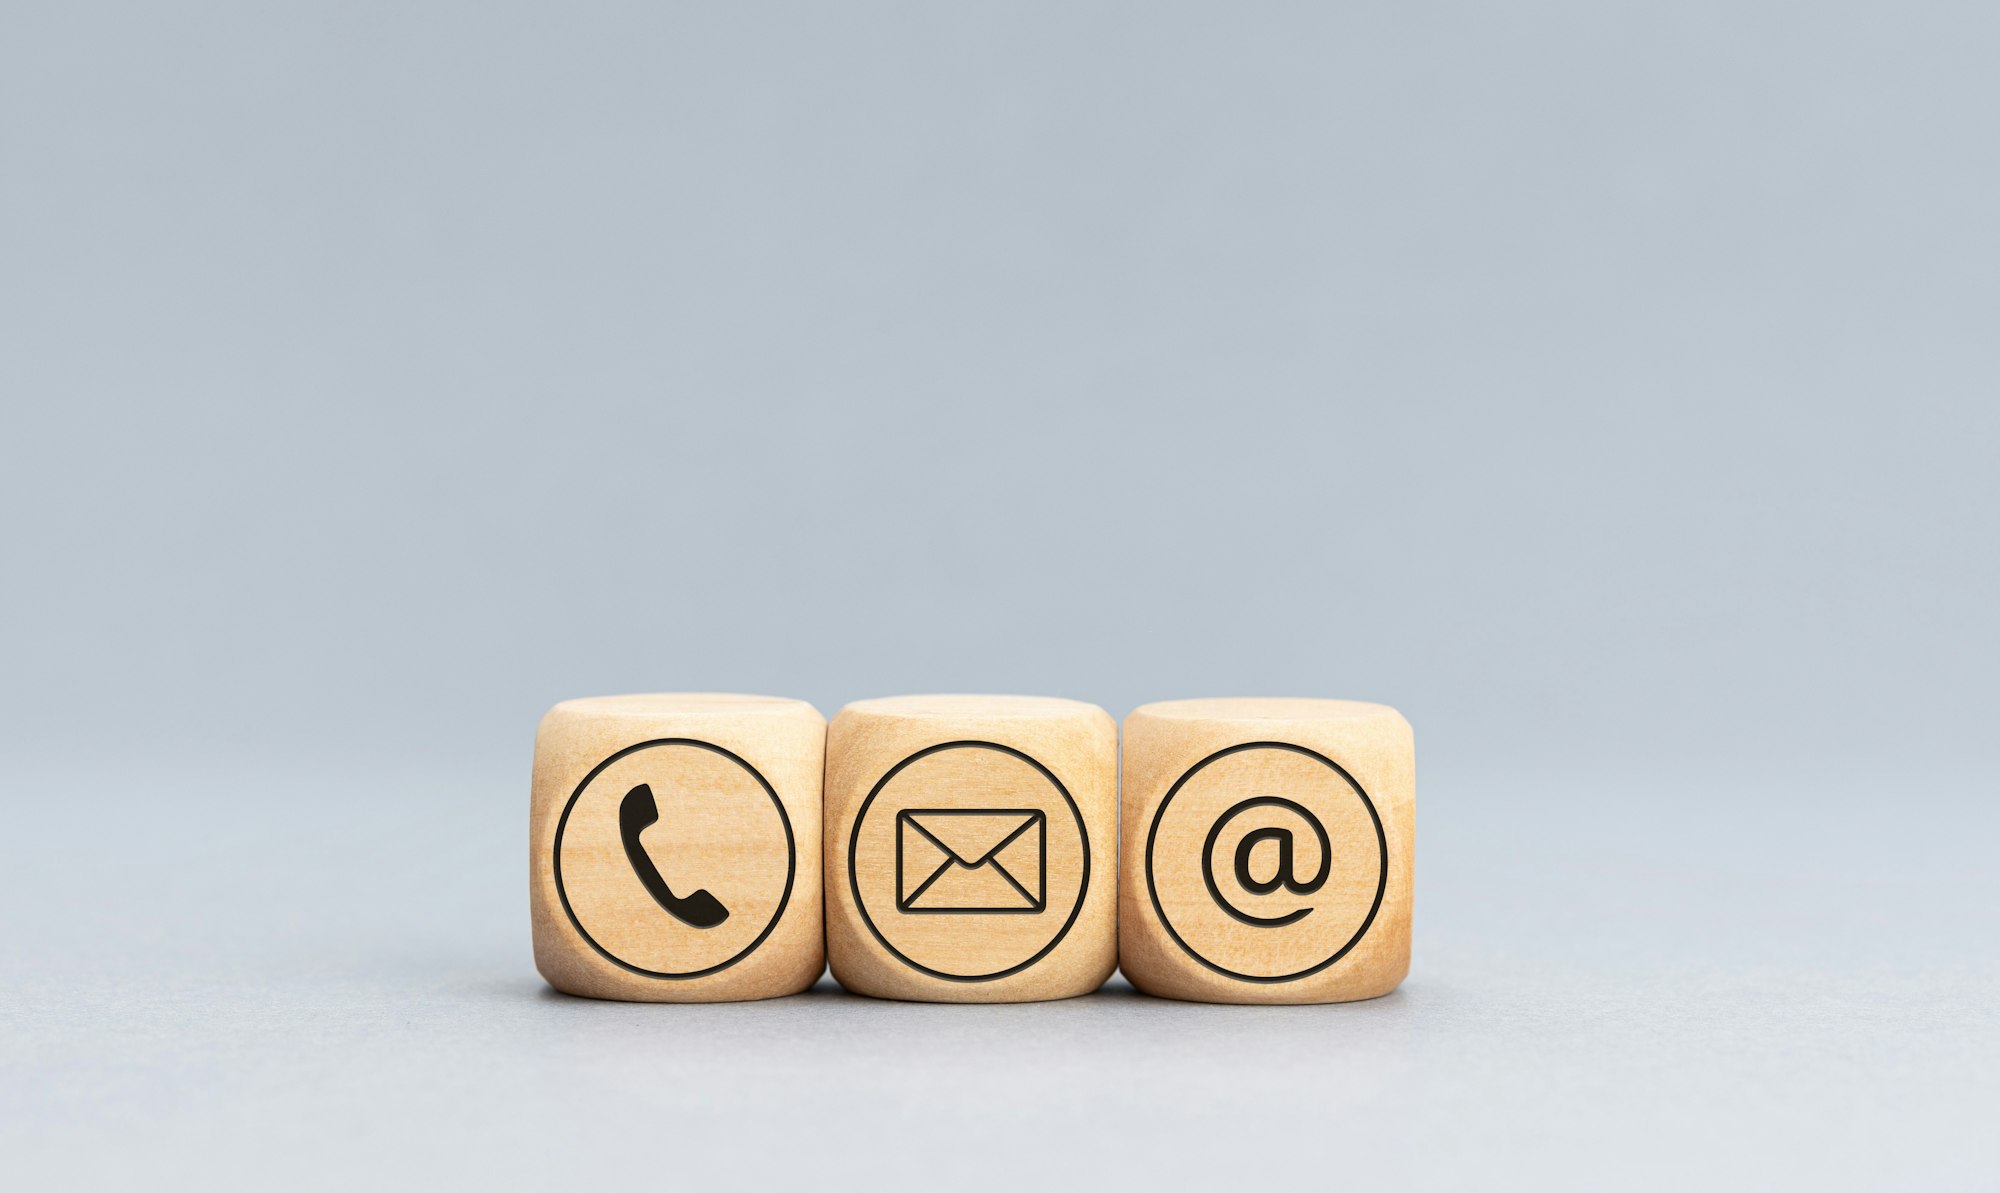 Contact icons on wooden blocks on gray background